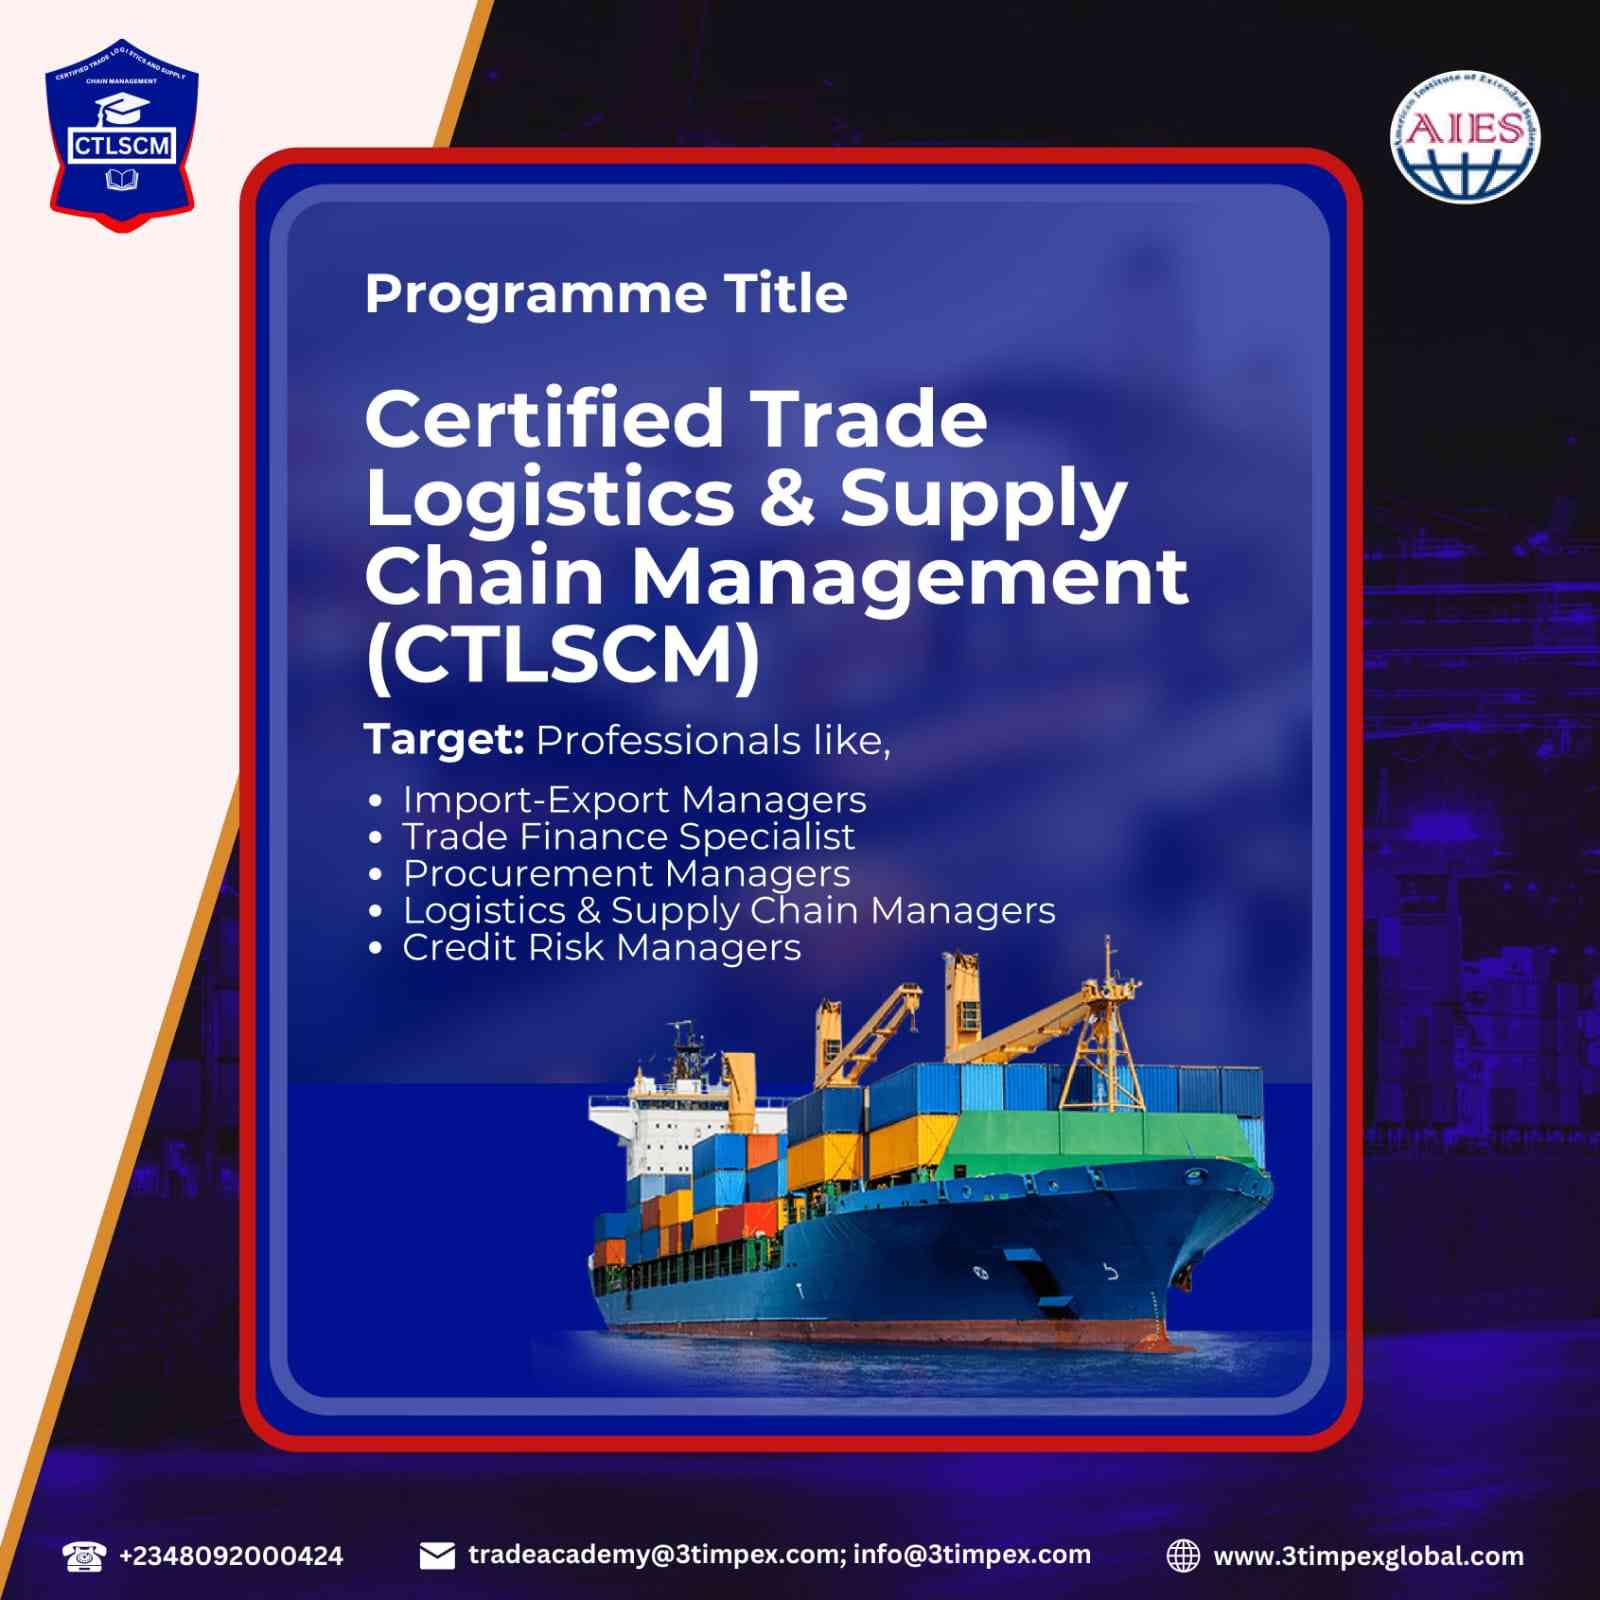 Certified Trade Logistics and Supply Chain Management Program